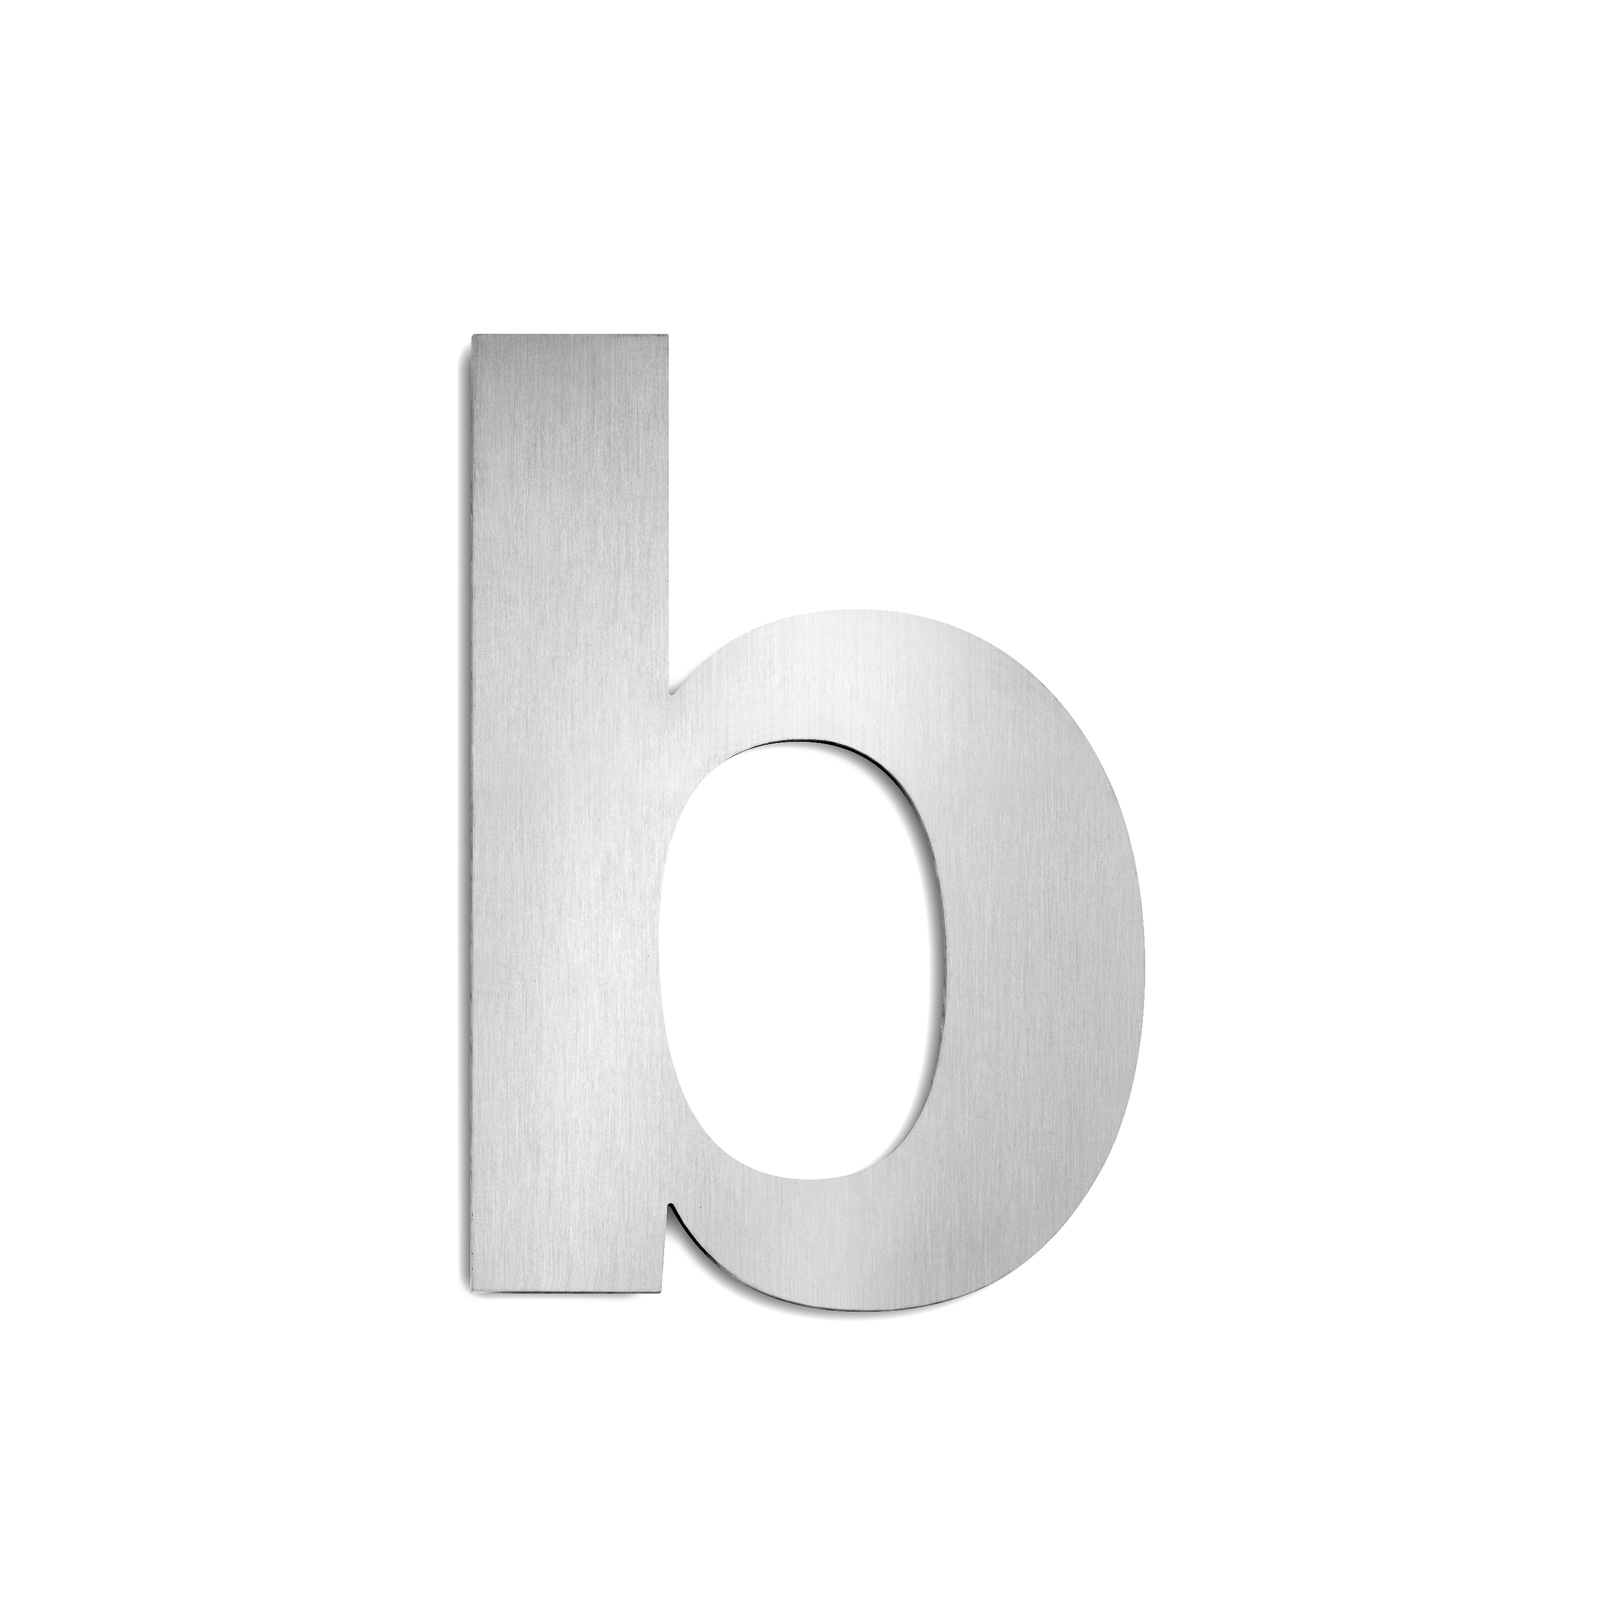 Large stainless steel house numbers - letter b